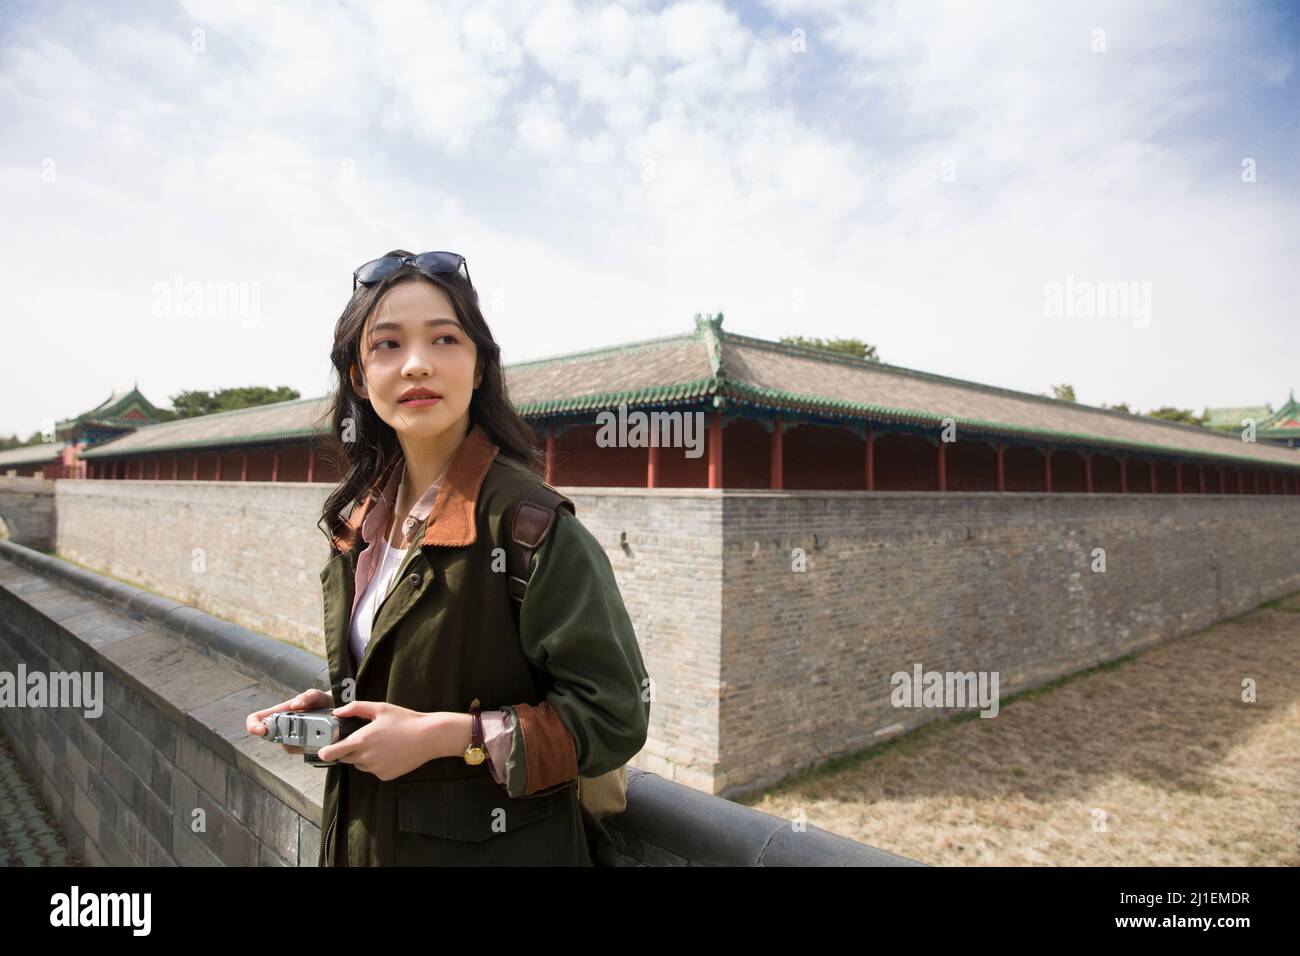 Young woman photographer standing on ancient city wall - stock photo Stock Photo